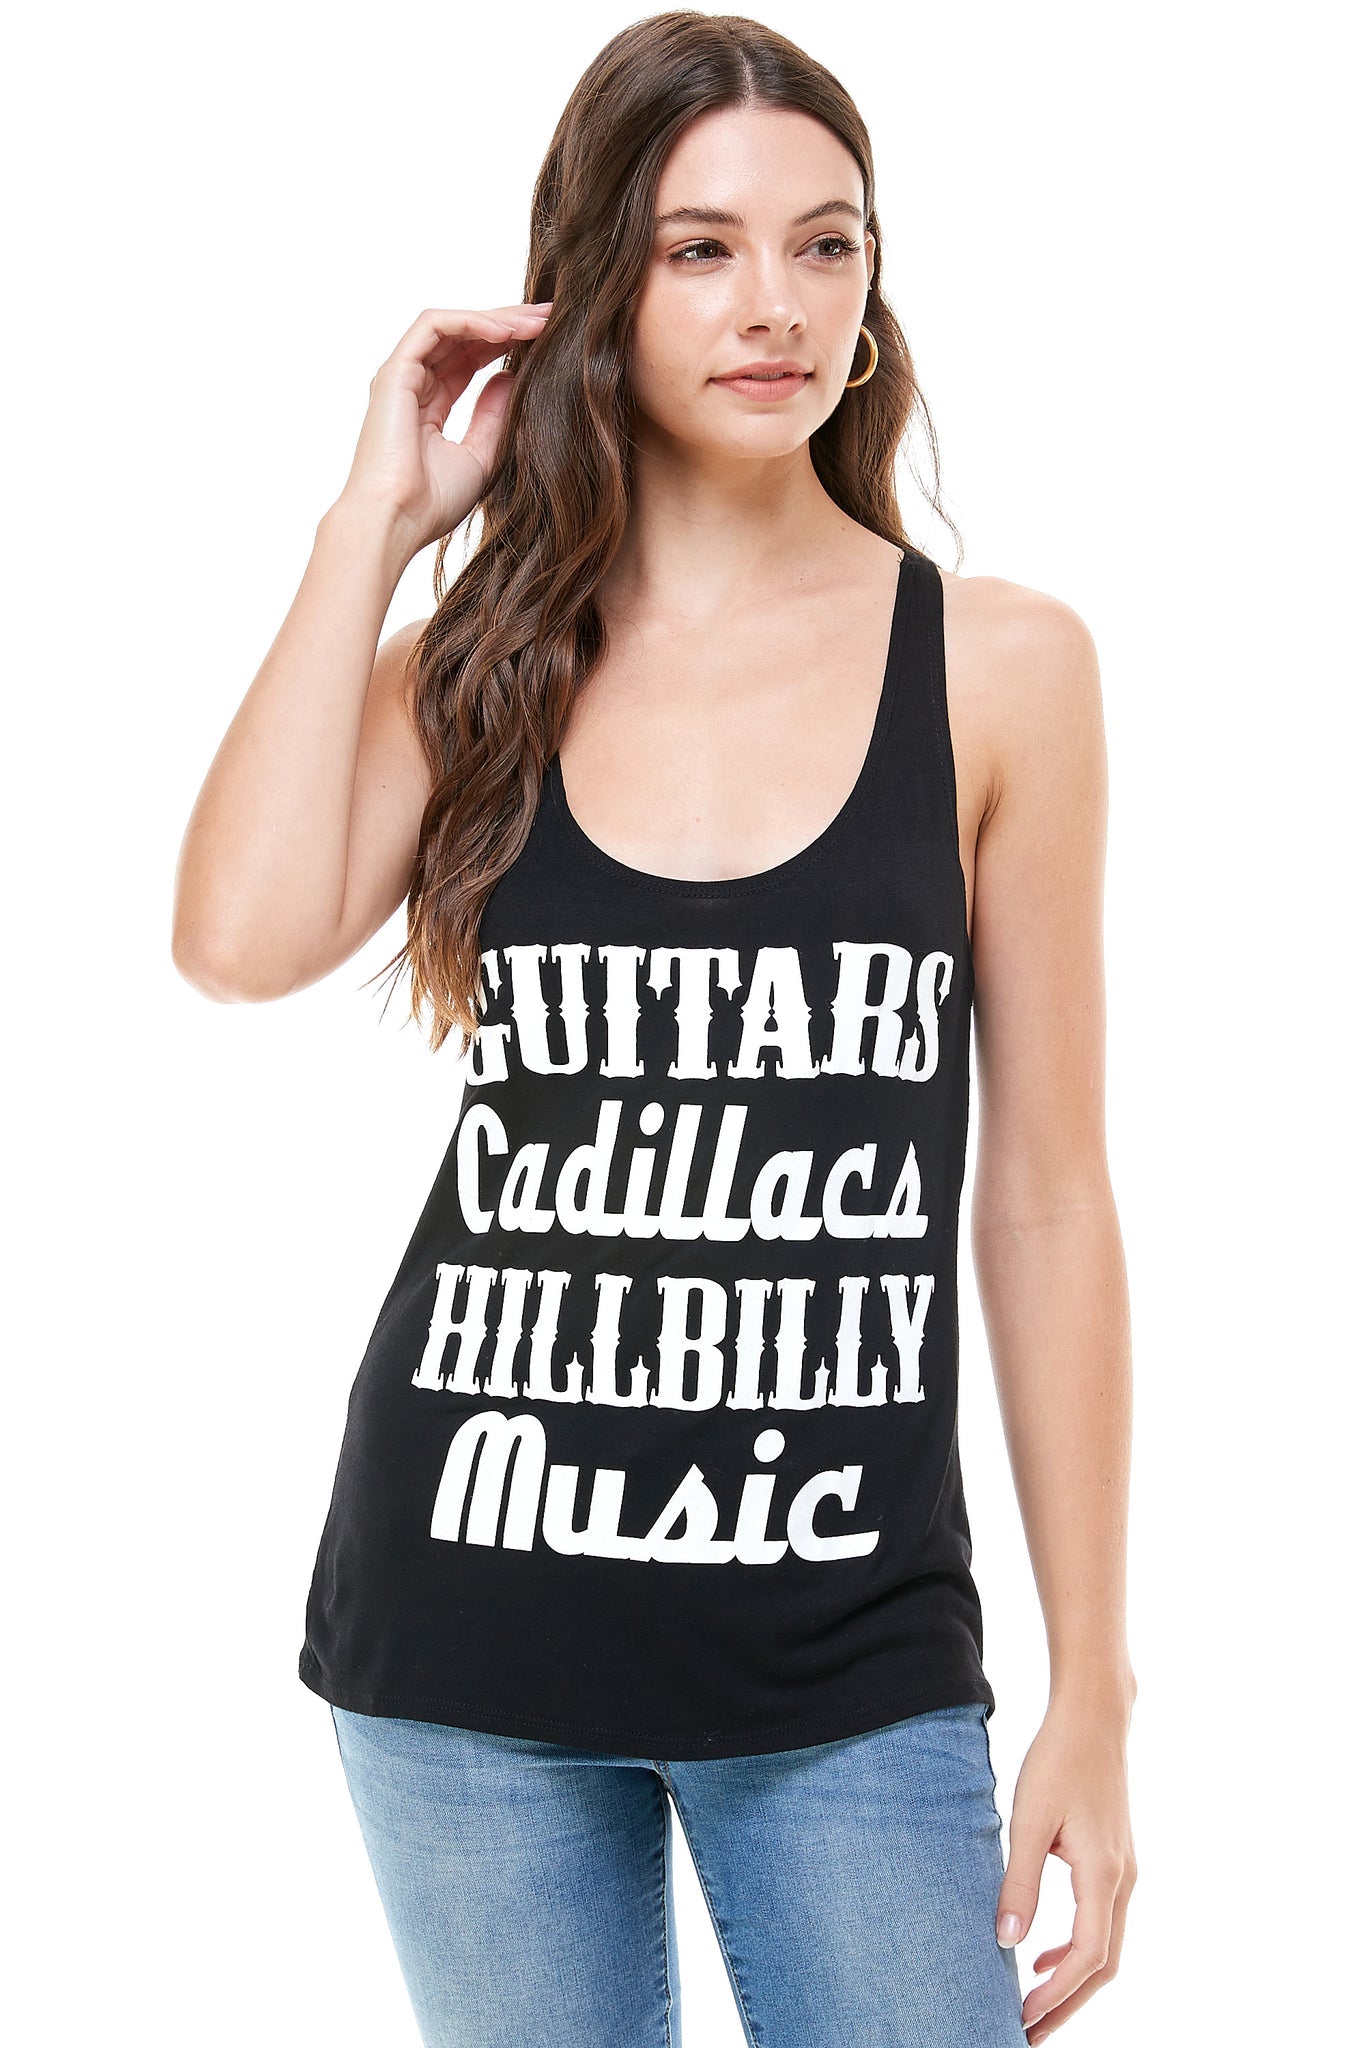 Guitars Cadillacs Tank - and, ATTITUDE, COUNTRY, countrystrong, COWGIRL, drinking, flag, GIRL, HOWDY, lips, love, moonshine, music, patriotic, peace, PLUS, rock, rocker, RODEO, roll, shine, SIZE, strong, SUMMER, TANK, TOP, WESTERN - Shirts & Tops - Baha Ranch Western Wear